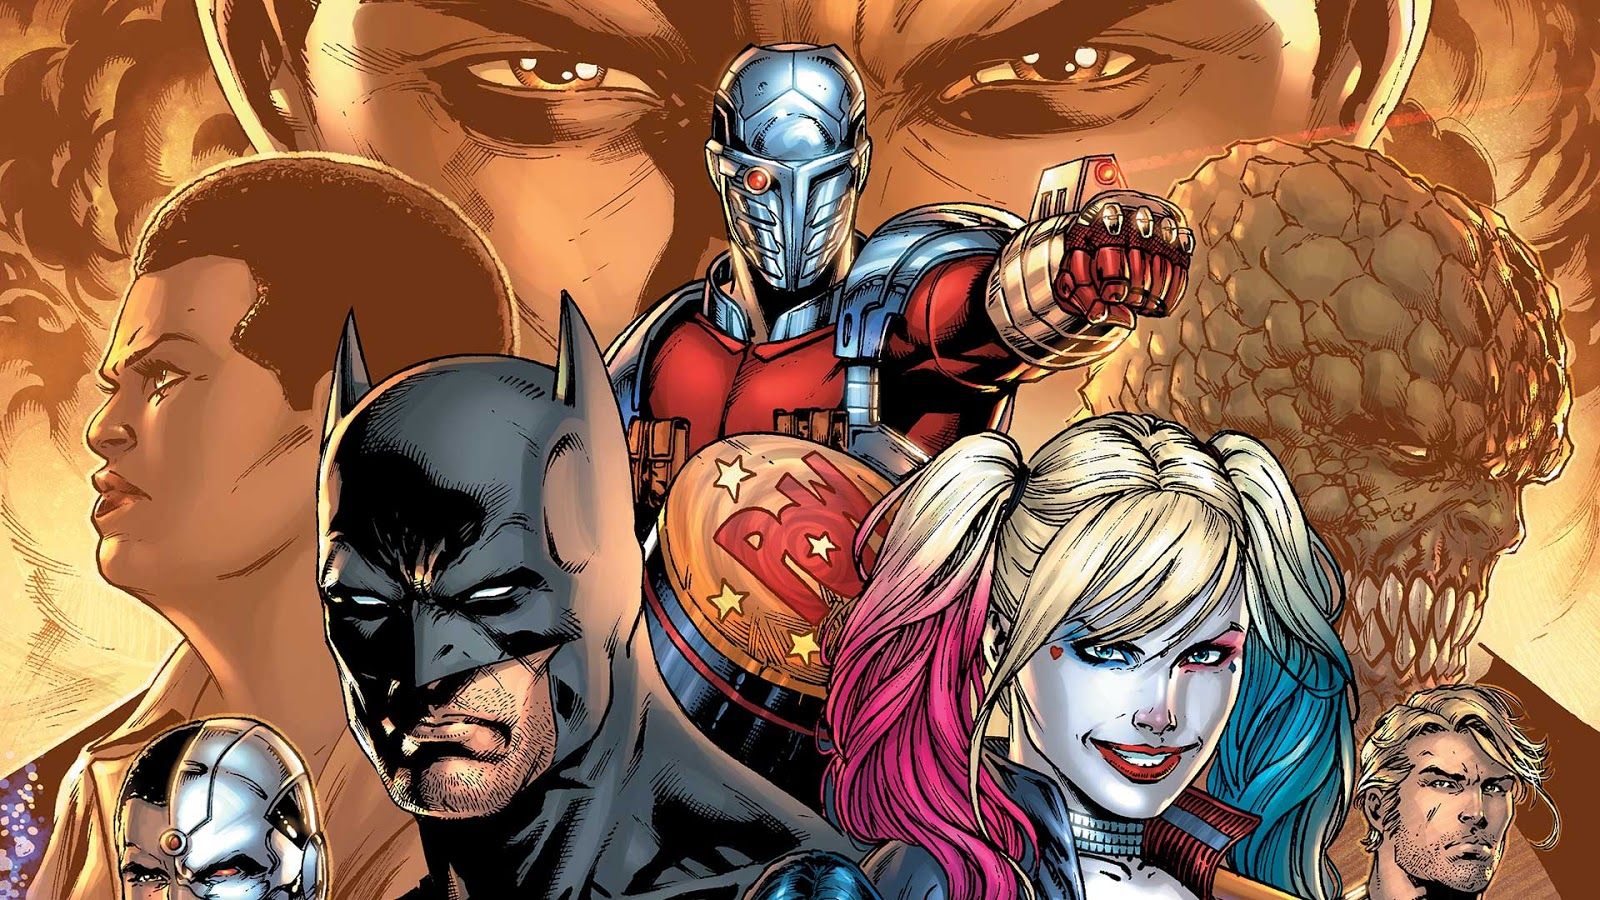 Weird Science DC Comics: Justice League Vs. Suicide Squad Review and *SPOILERS*